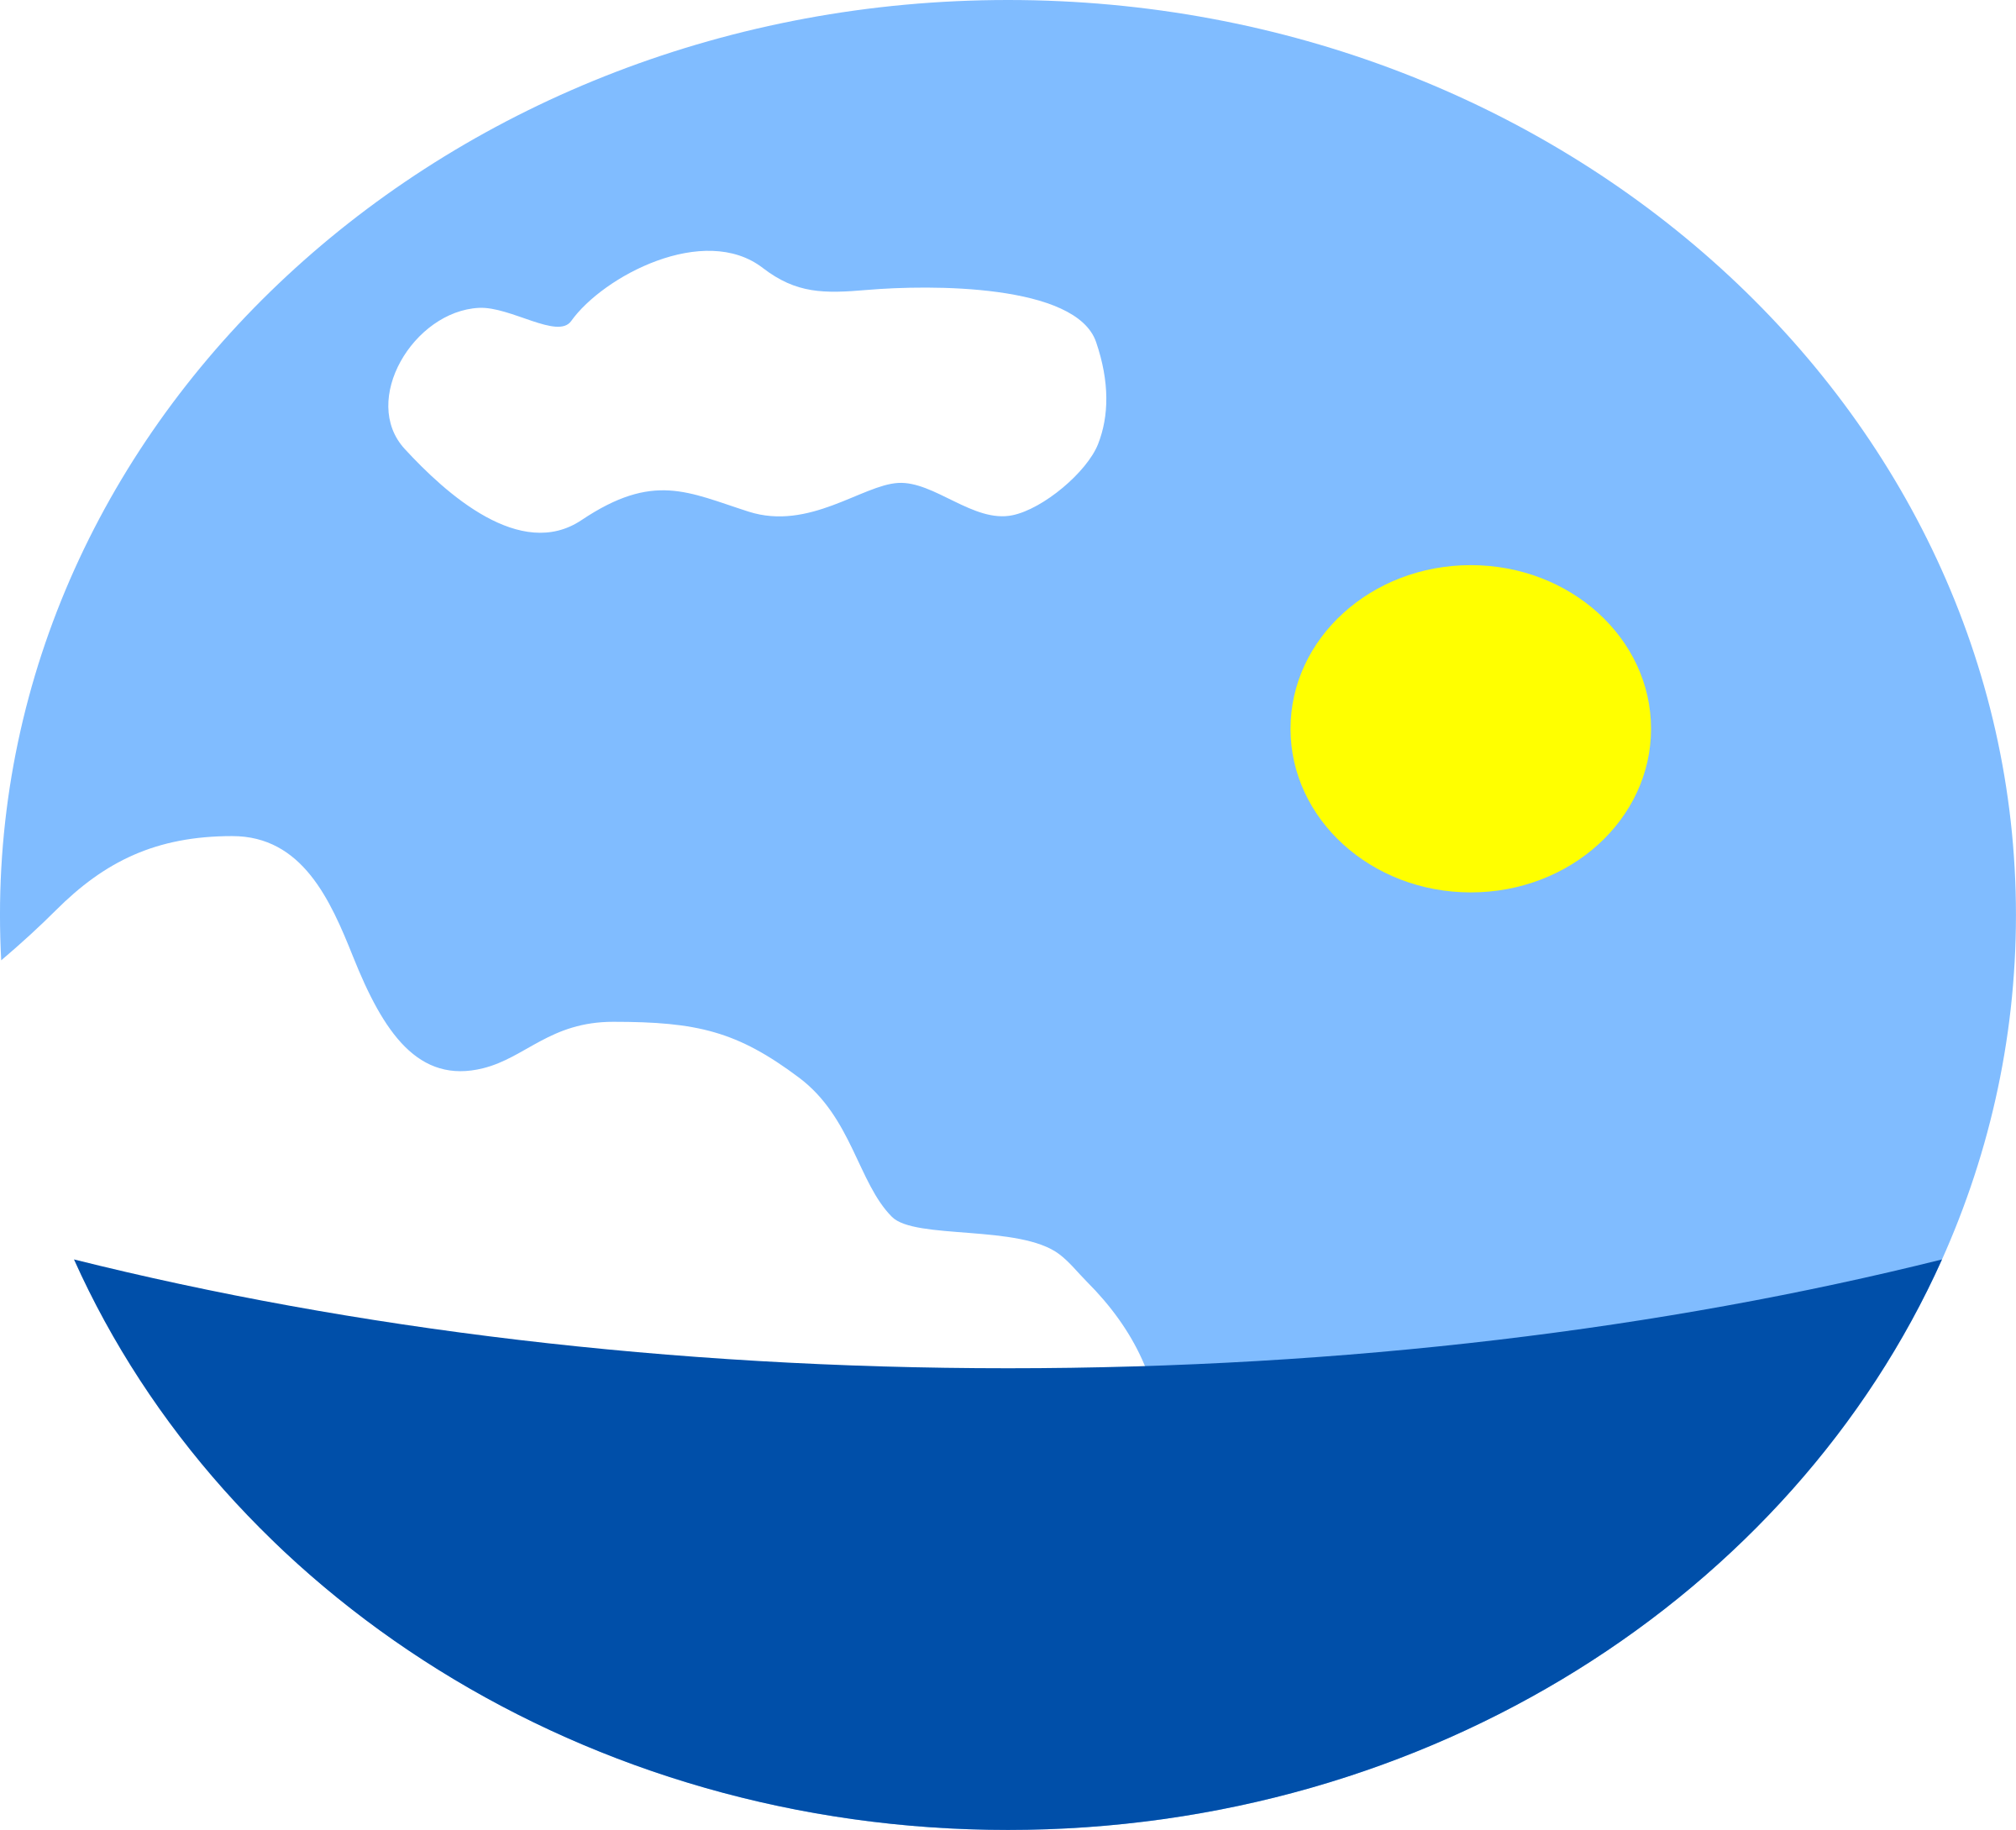 Clipart ocean cloud. Clouds at sea clipground